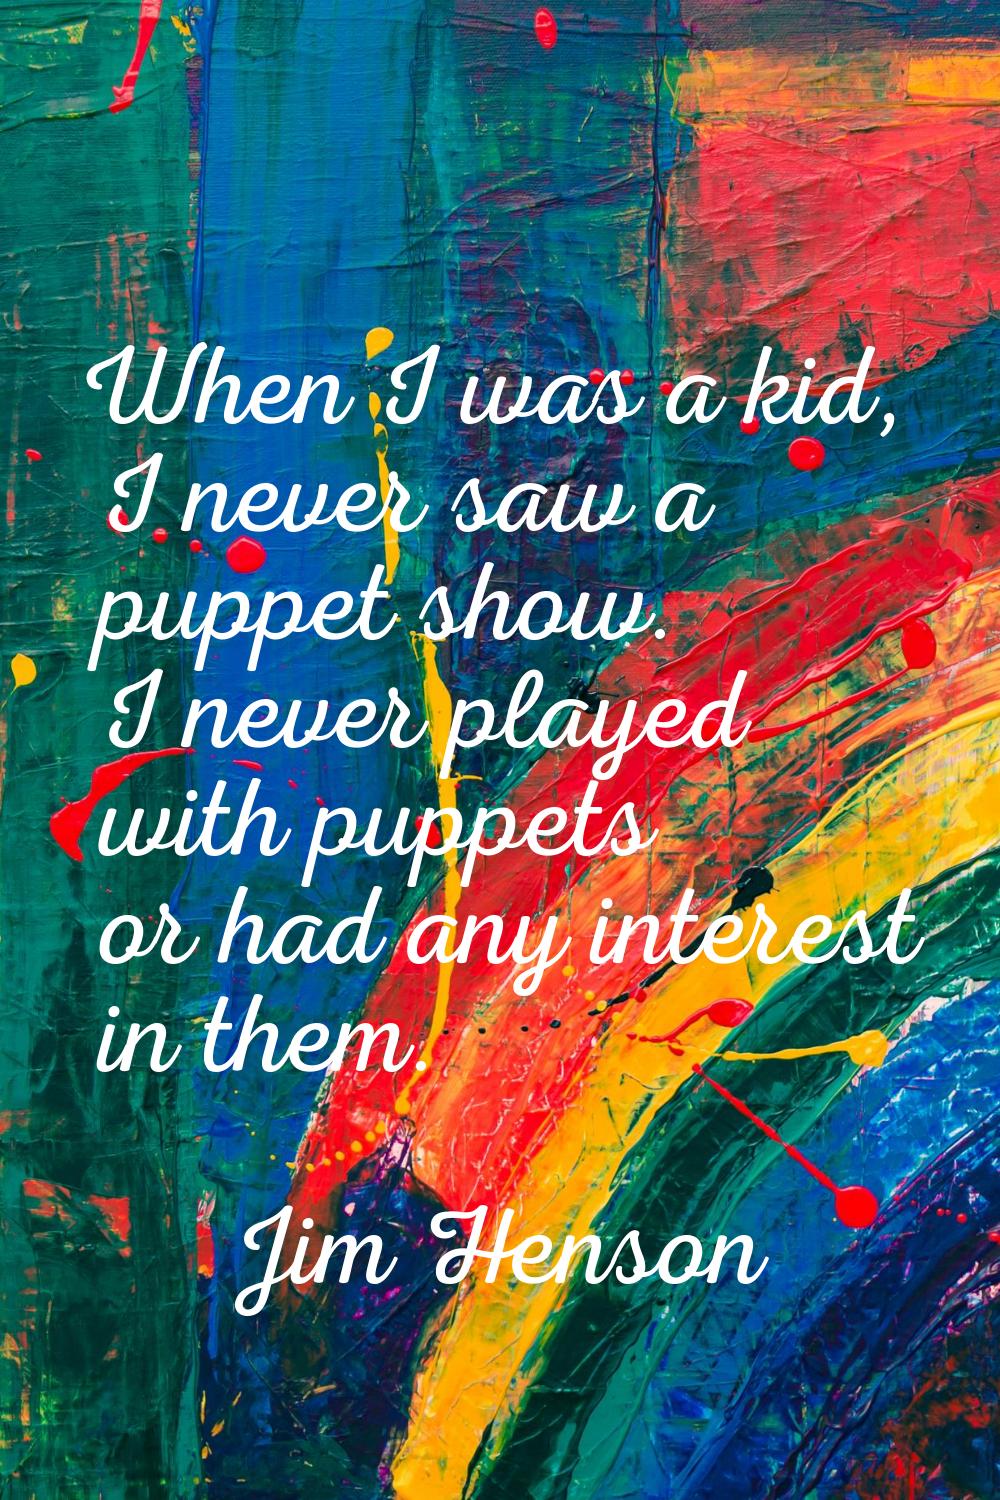 When I was a kid, I never saw a puppet show. I never played with puppets or had any interest in the